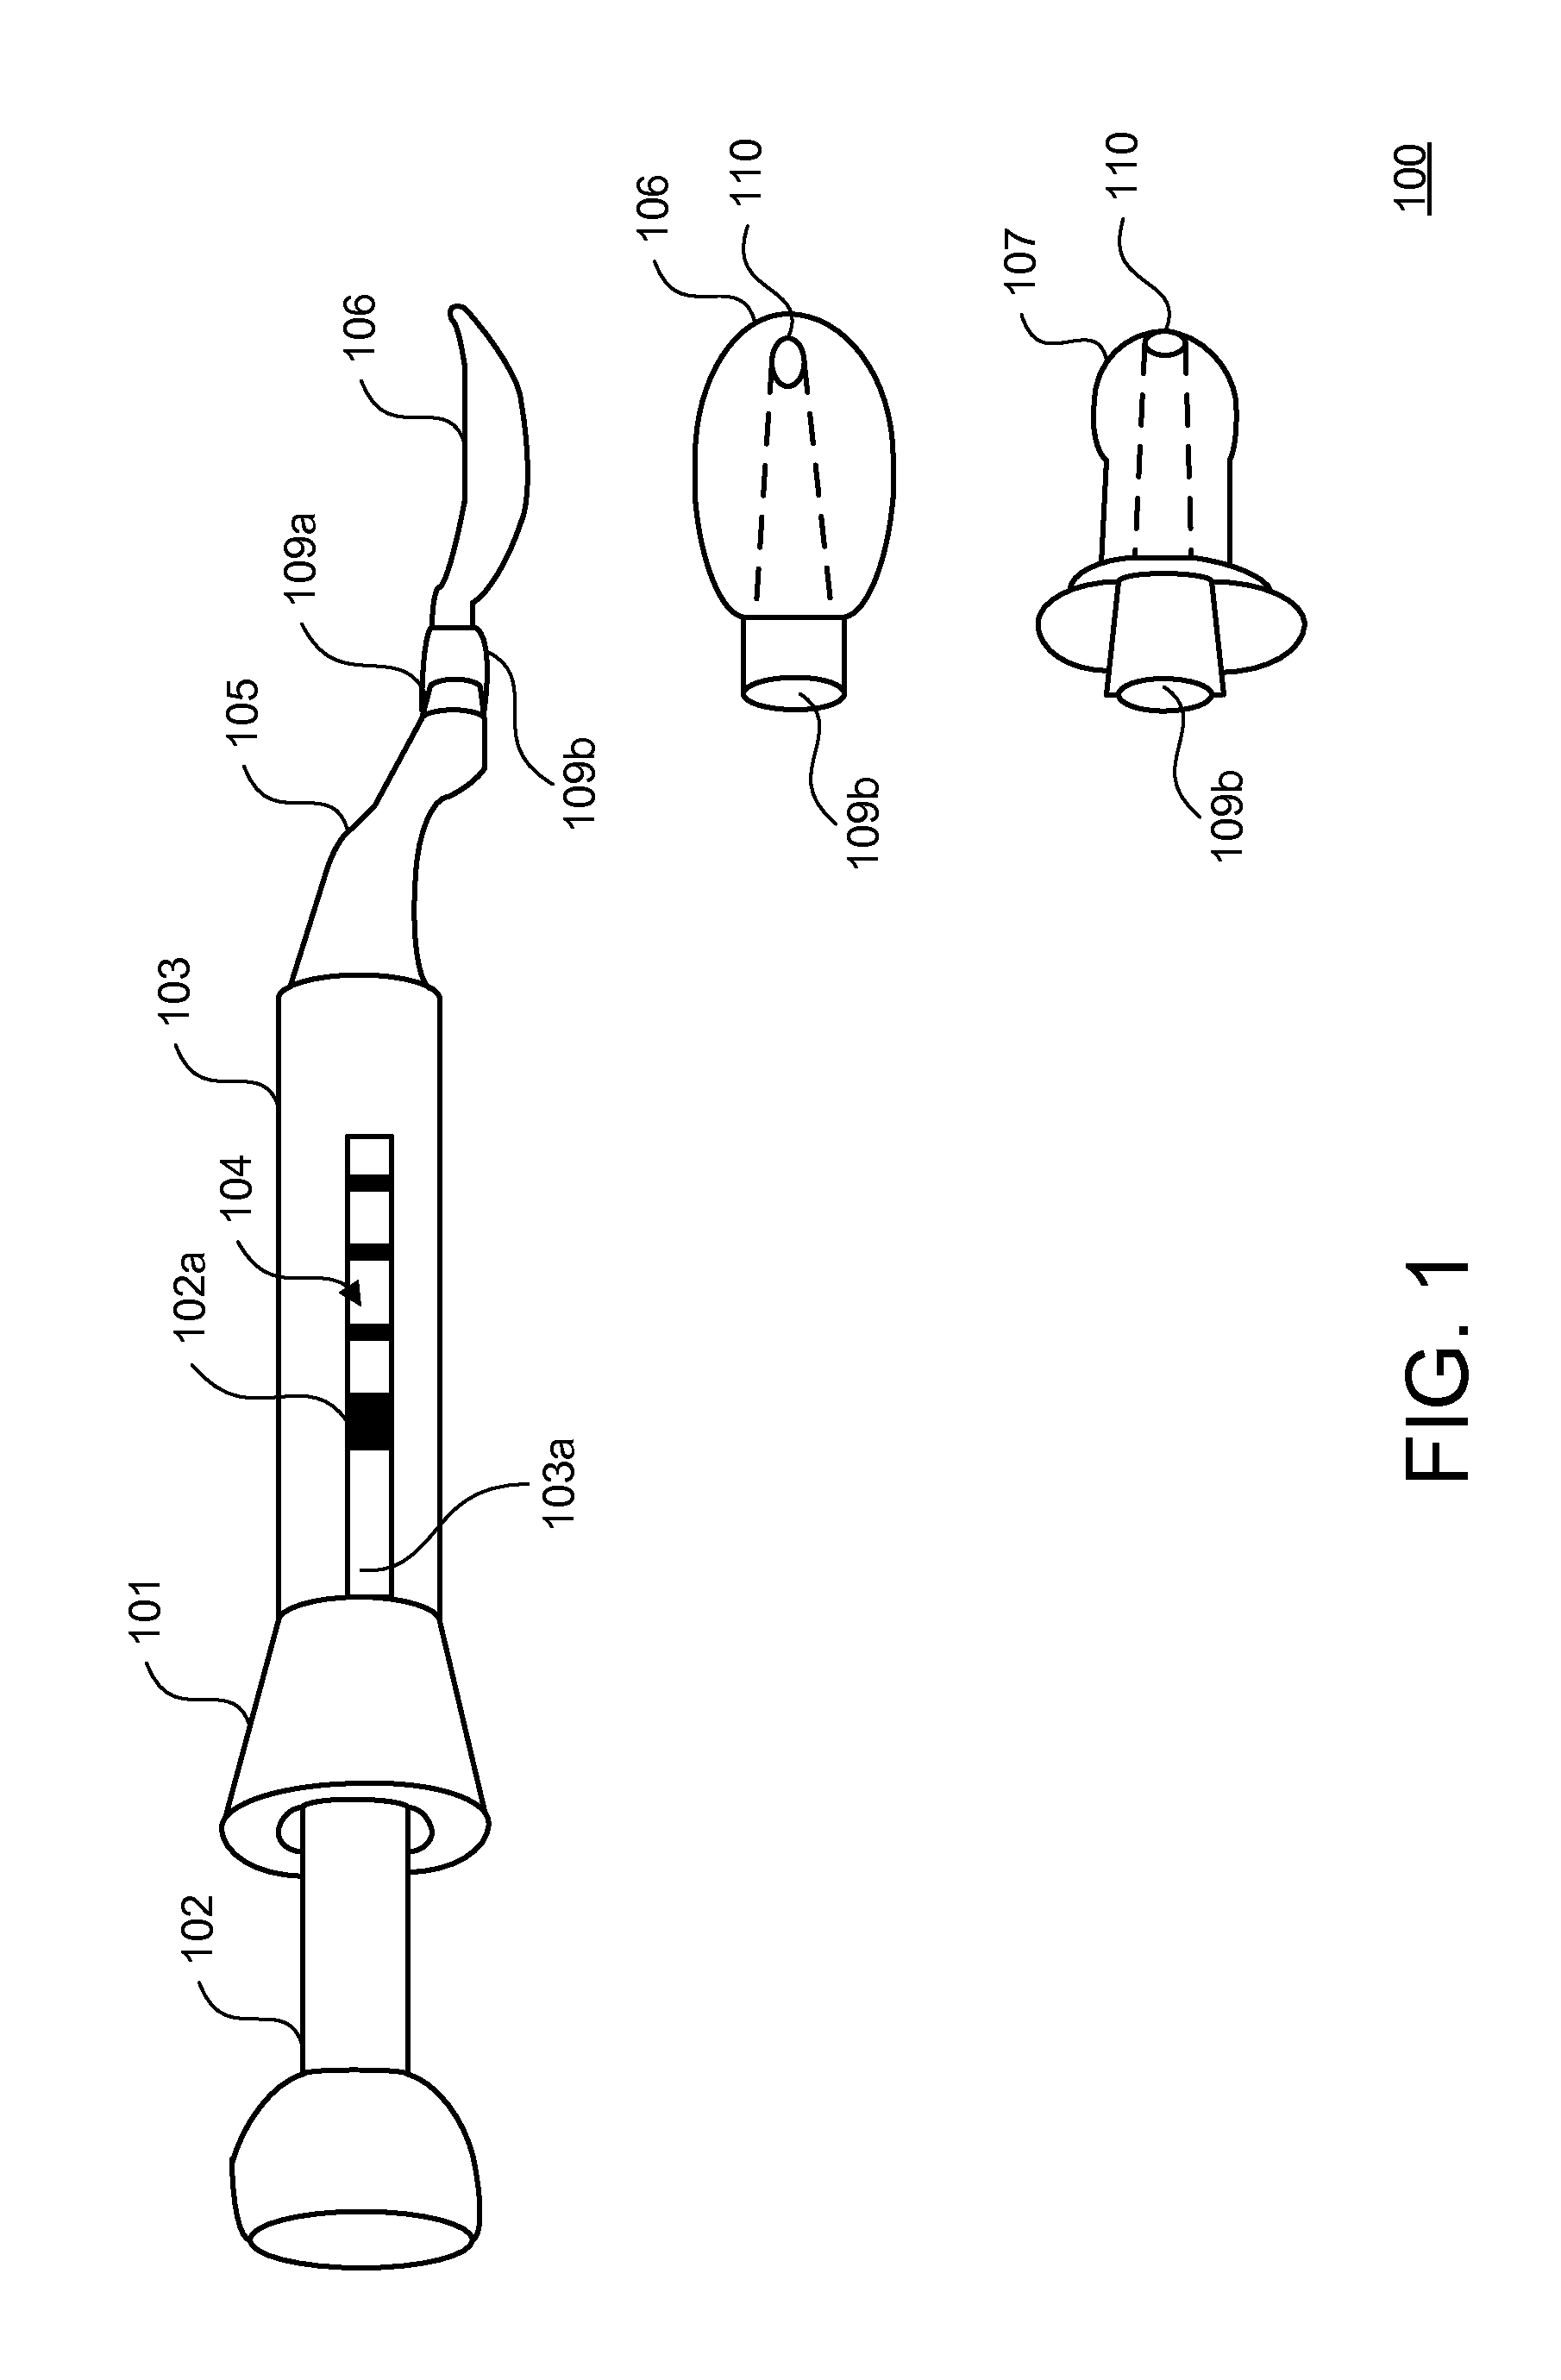 Infant feeding spoon with attachments for dispensing food